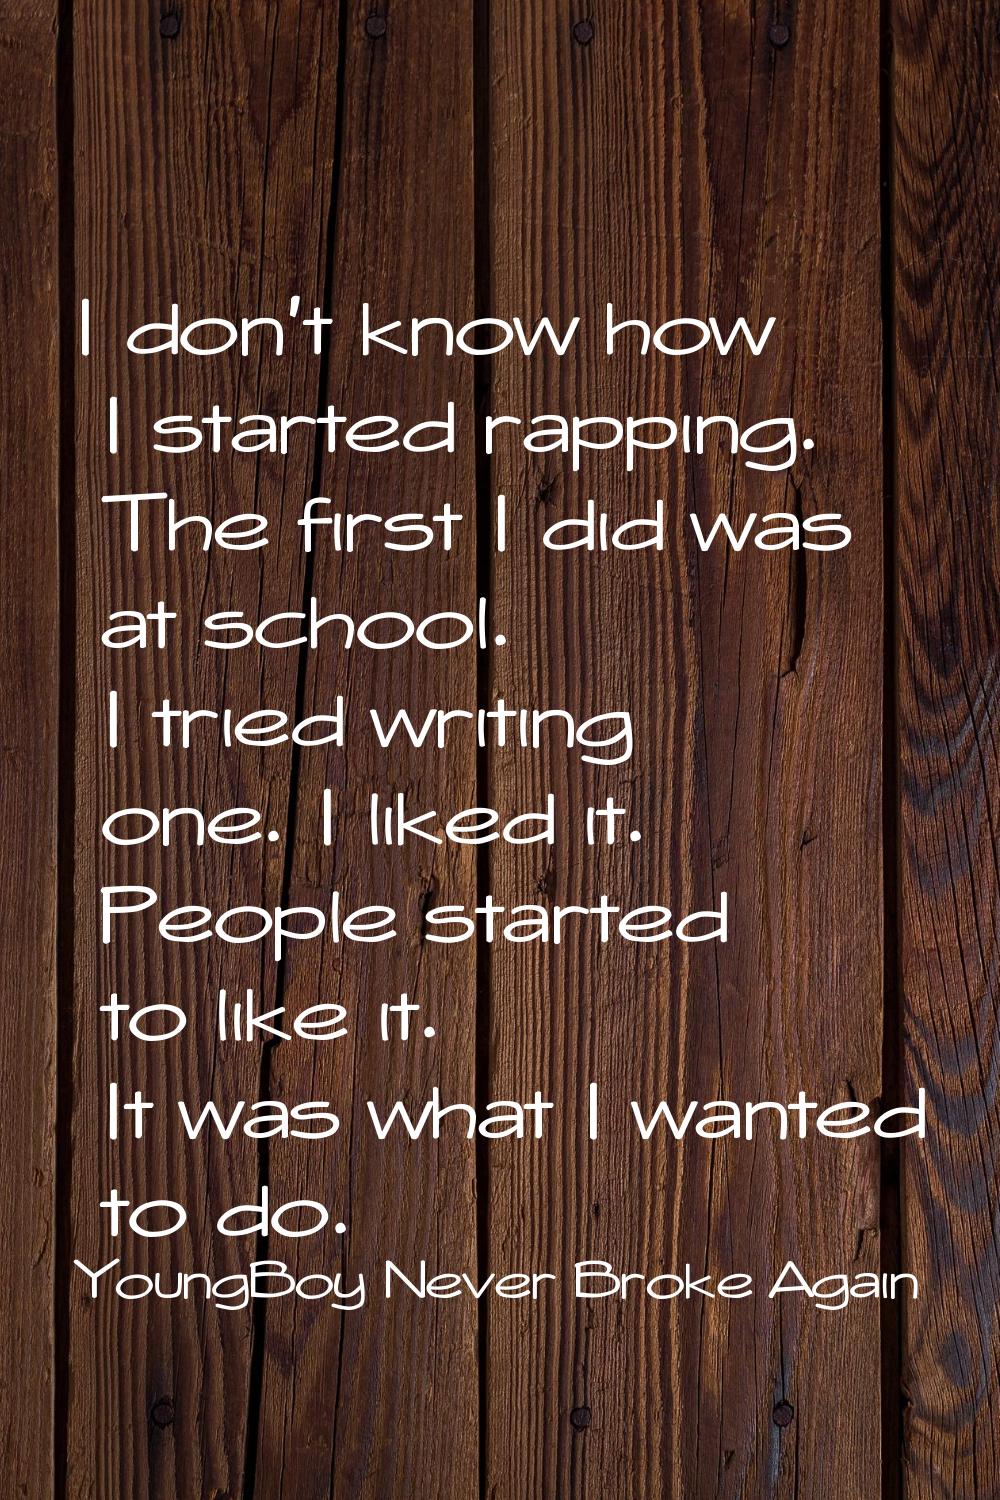 I don't know how I started rapping. The first I did was at school. I tried writing one. I liked it.